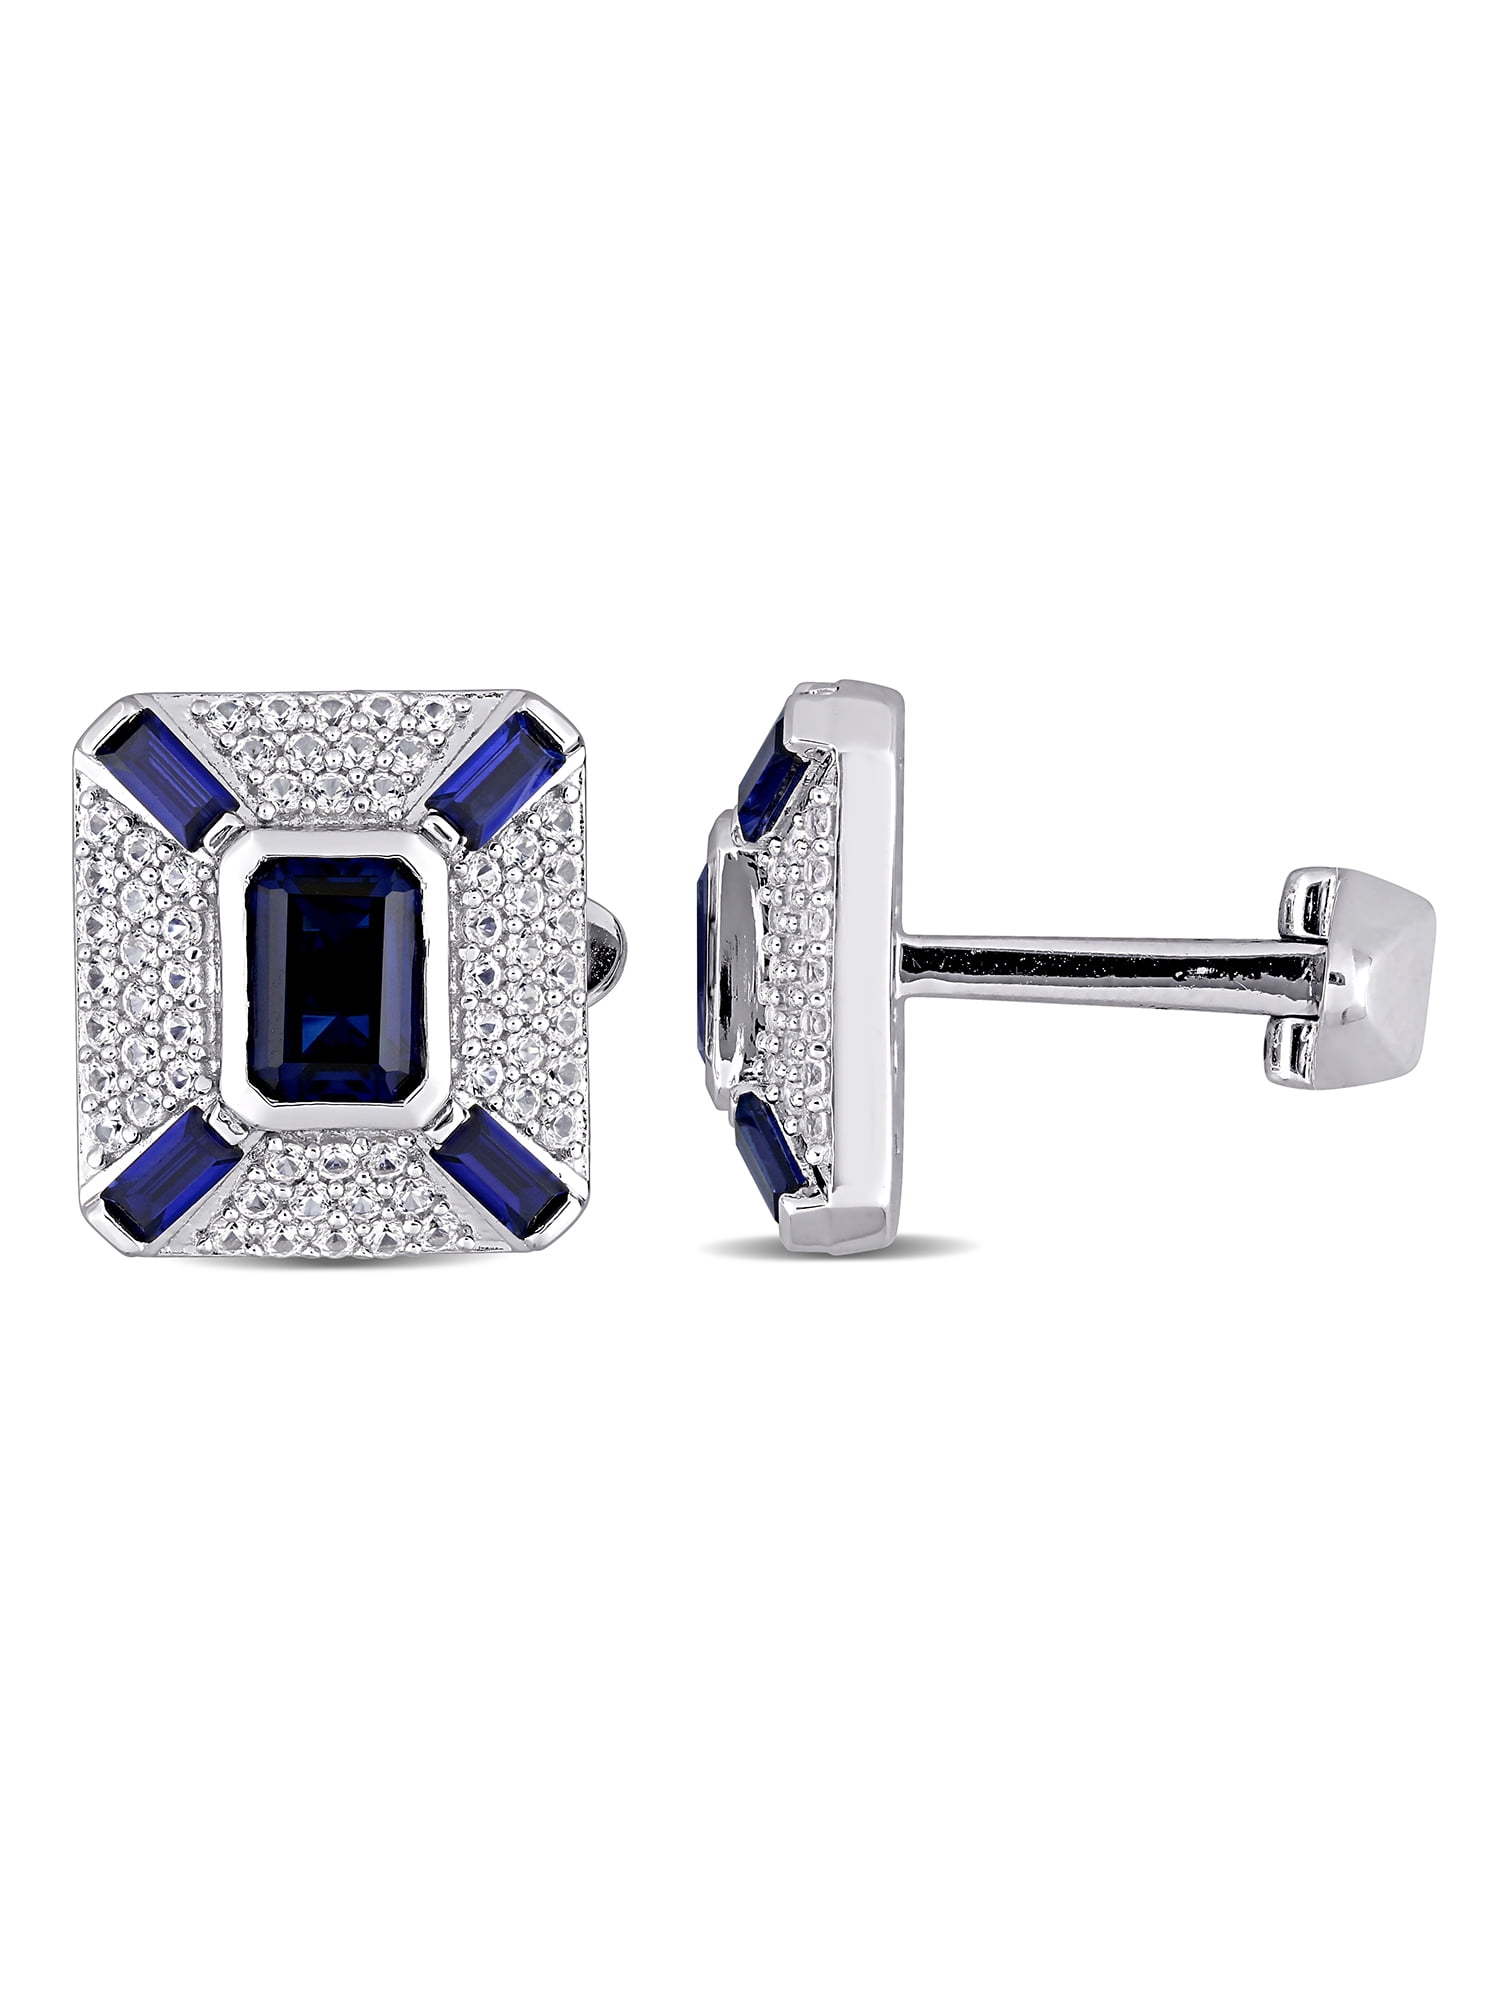 Details about   Platinum Sterling Silver White Sapphire & Black Onyx Rectangle Absract Cufflinks 